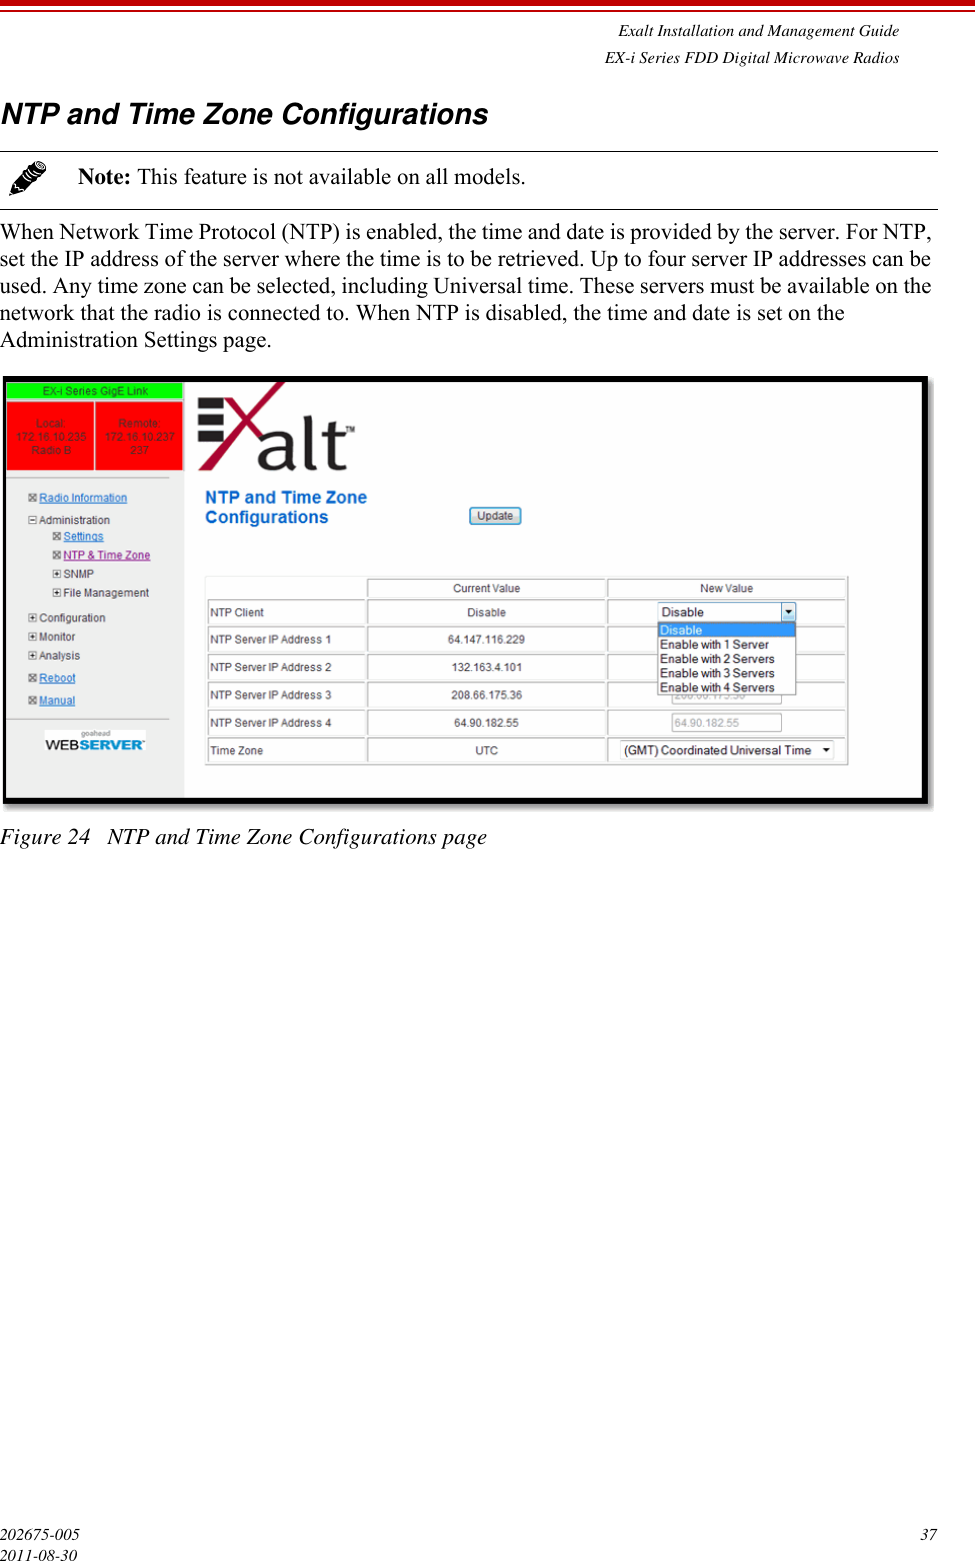 Exalt Installation and Management GuideEX-i Series FDD Digital Microwave Radios202675-005 372011-08-30NTP and Time Zone ConfigurationsWhen Network Time Protocol (NTP) is enabled, the time and date is provided by the server. For NTP, set the IP address of the server where the time is to be retrieved. Up to four server IP addresses can be used. Any time zone can be selected, including Universal time. These servers must be available on the network that the radio is connected to. When NTP is disabled, the time and date is set on the Administration Settings page.Figure 24   NTP and Time Zone Configurations pageNote: This feature is not available on all models.